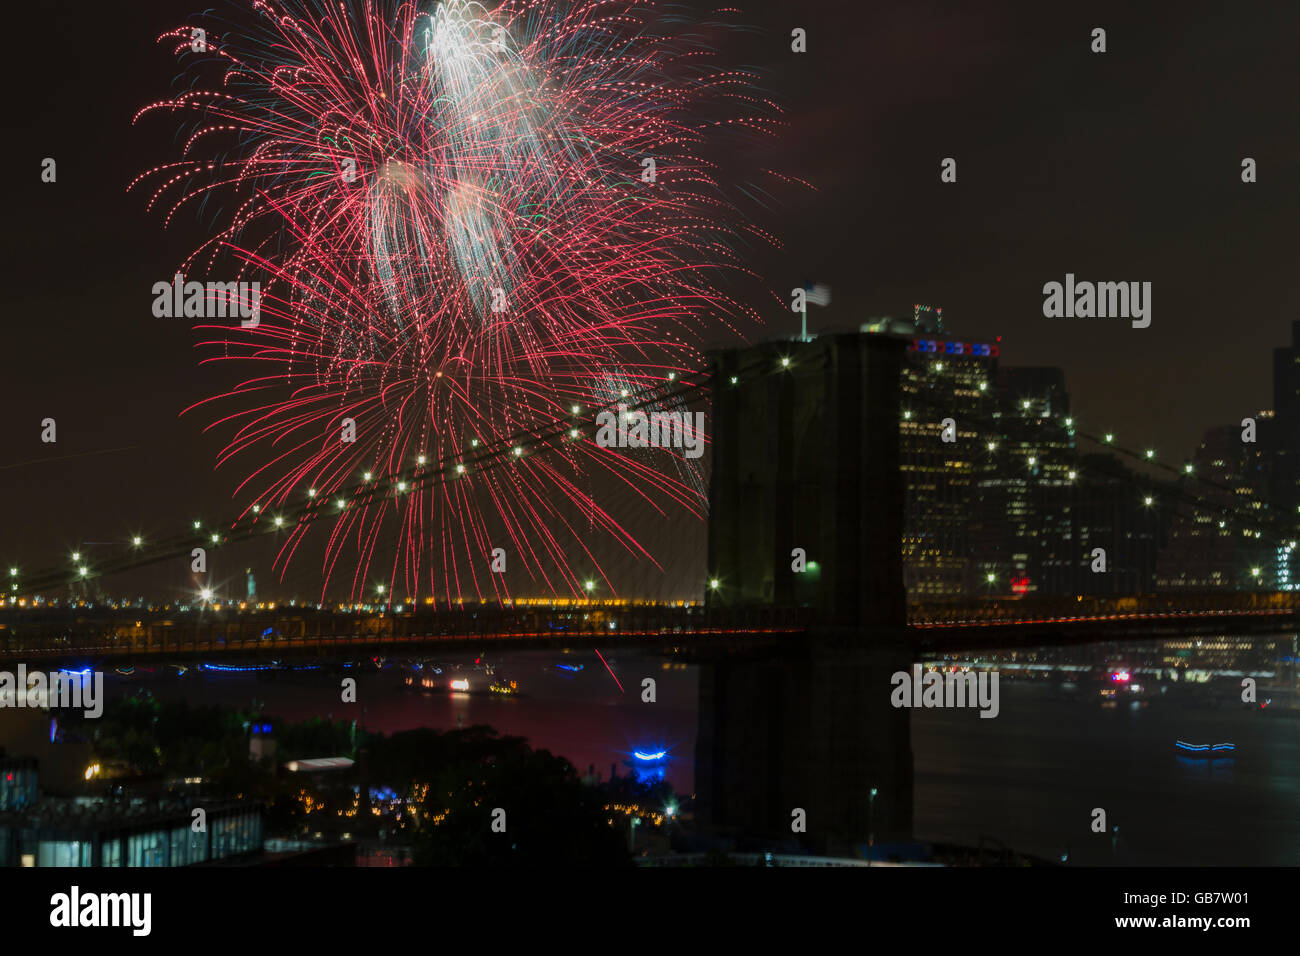 New York, NY USA - July 4, 2016: View of 40th annual Macys 4th of July fireworks on East River with Brooklyn bridge on foreground Stock Photo